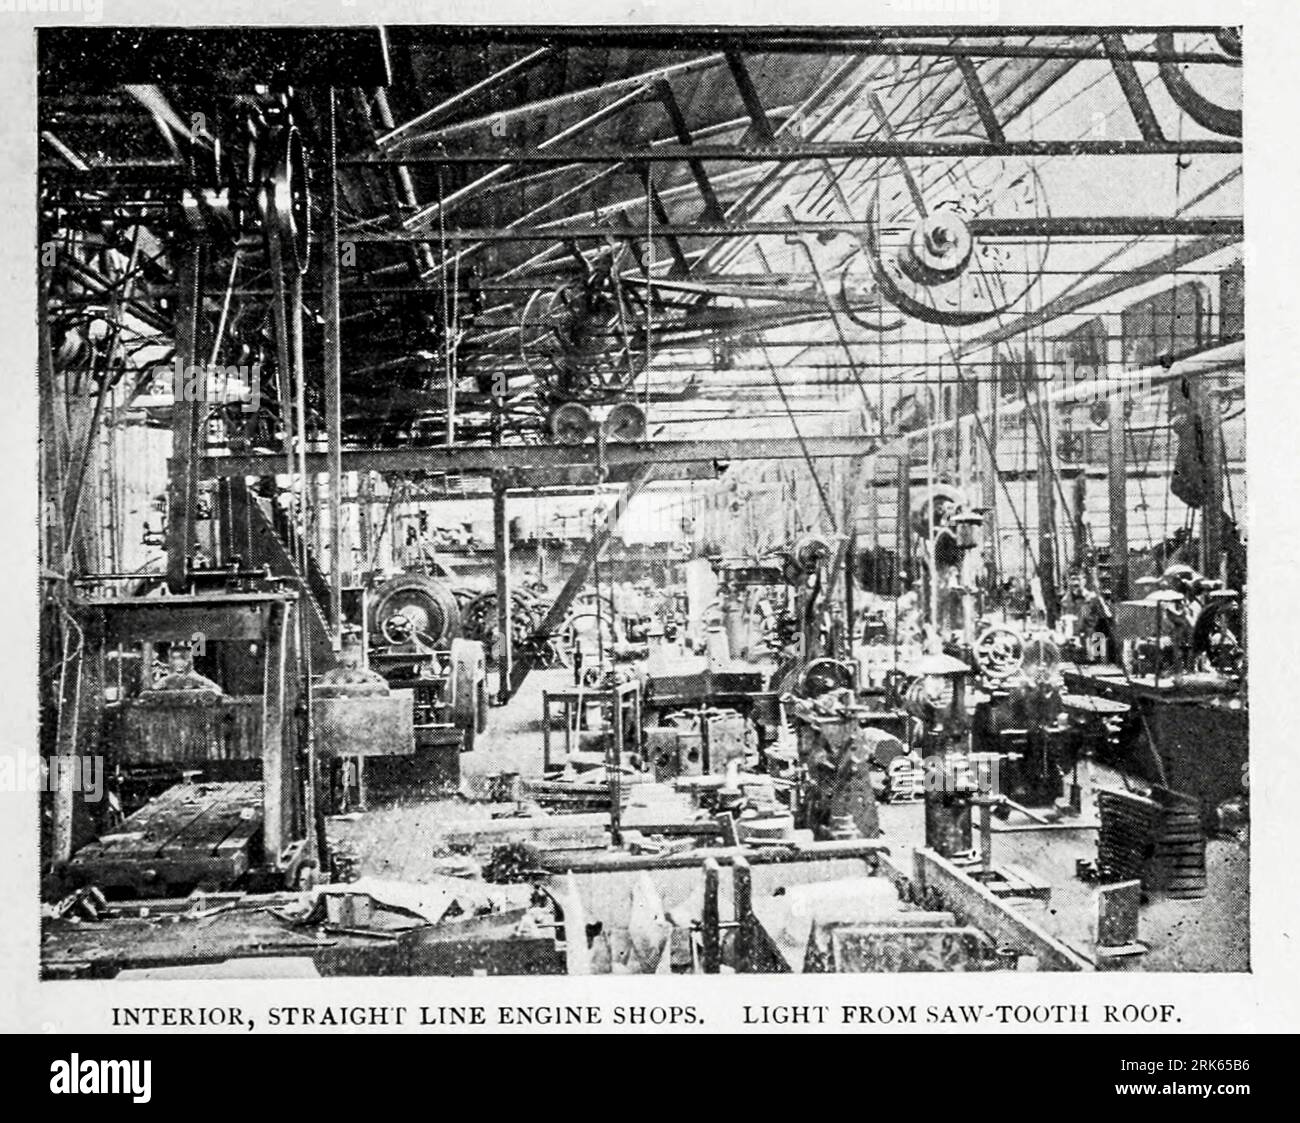 Interior Sweet's Straight Line Engine Shops, Syracuse NY, Light from Saw Tooth Roof from the Article MODERN MACHINE-SHOP ECONOMICS PRIME REQUISITES OF SHOP CONSTRUCTION By Horace L. Arnold from The Engineering Magazine DEVOTED TO INDUSTRIAL PROGRESS Volume XI October 1896 NEW YORK The Engineering Magazine Co Stock Photo